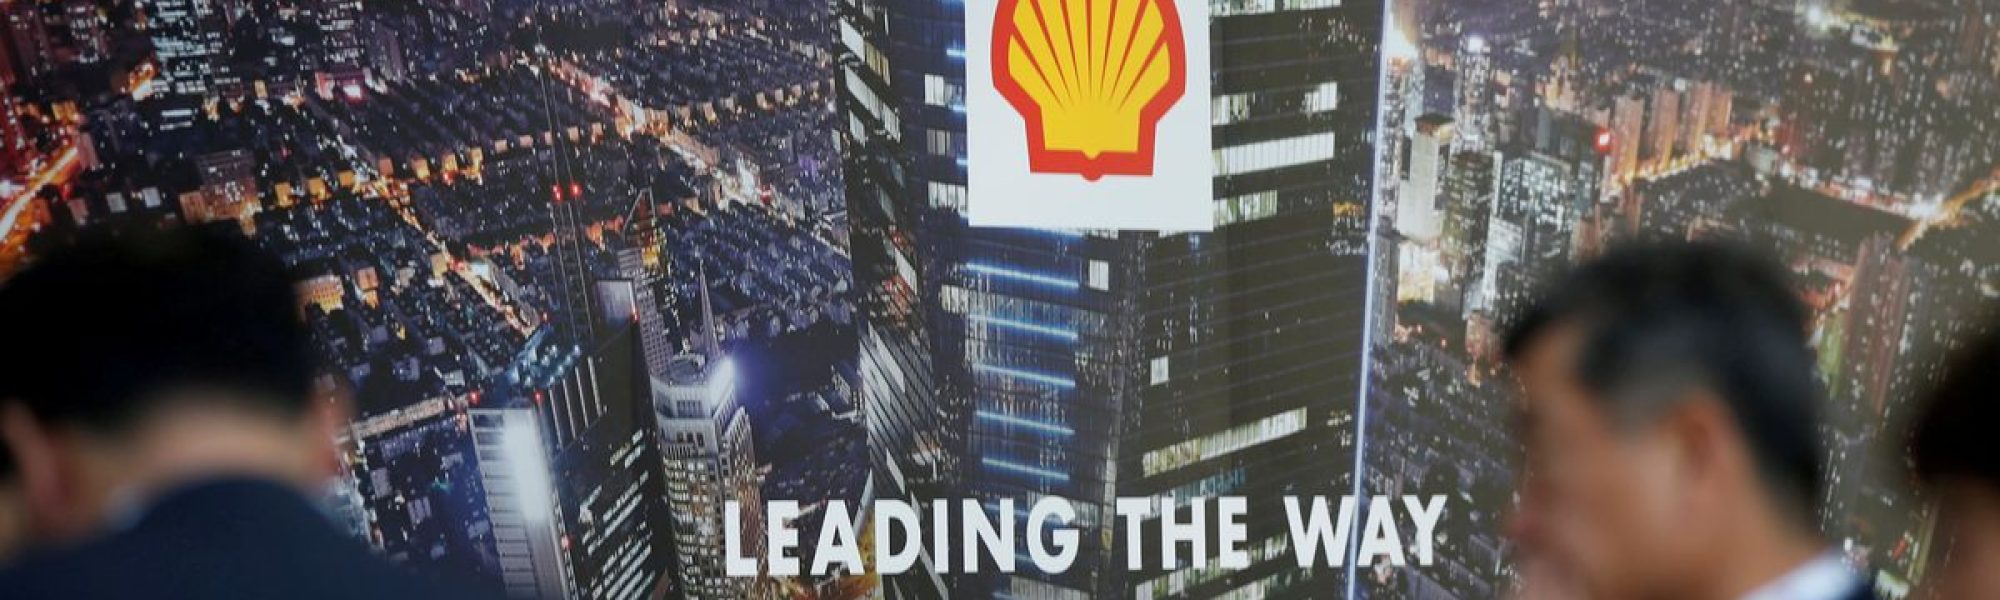 Weakening refining, gas trading to hit Shell's Q3 results